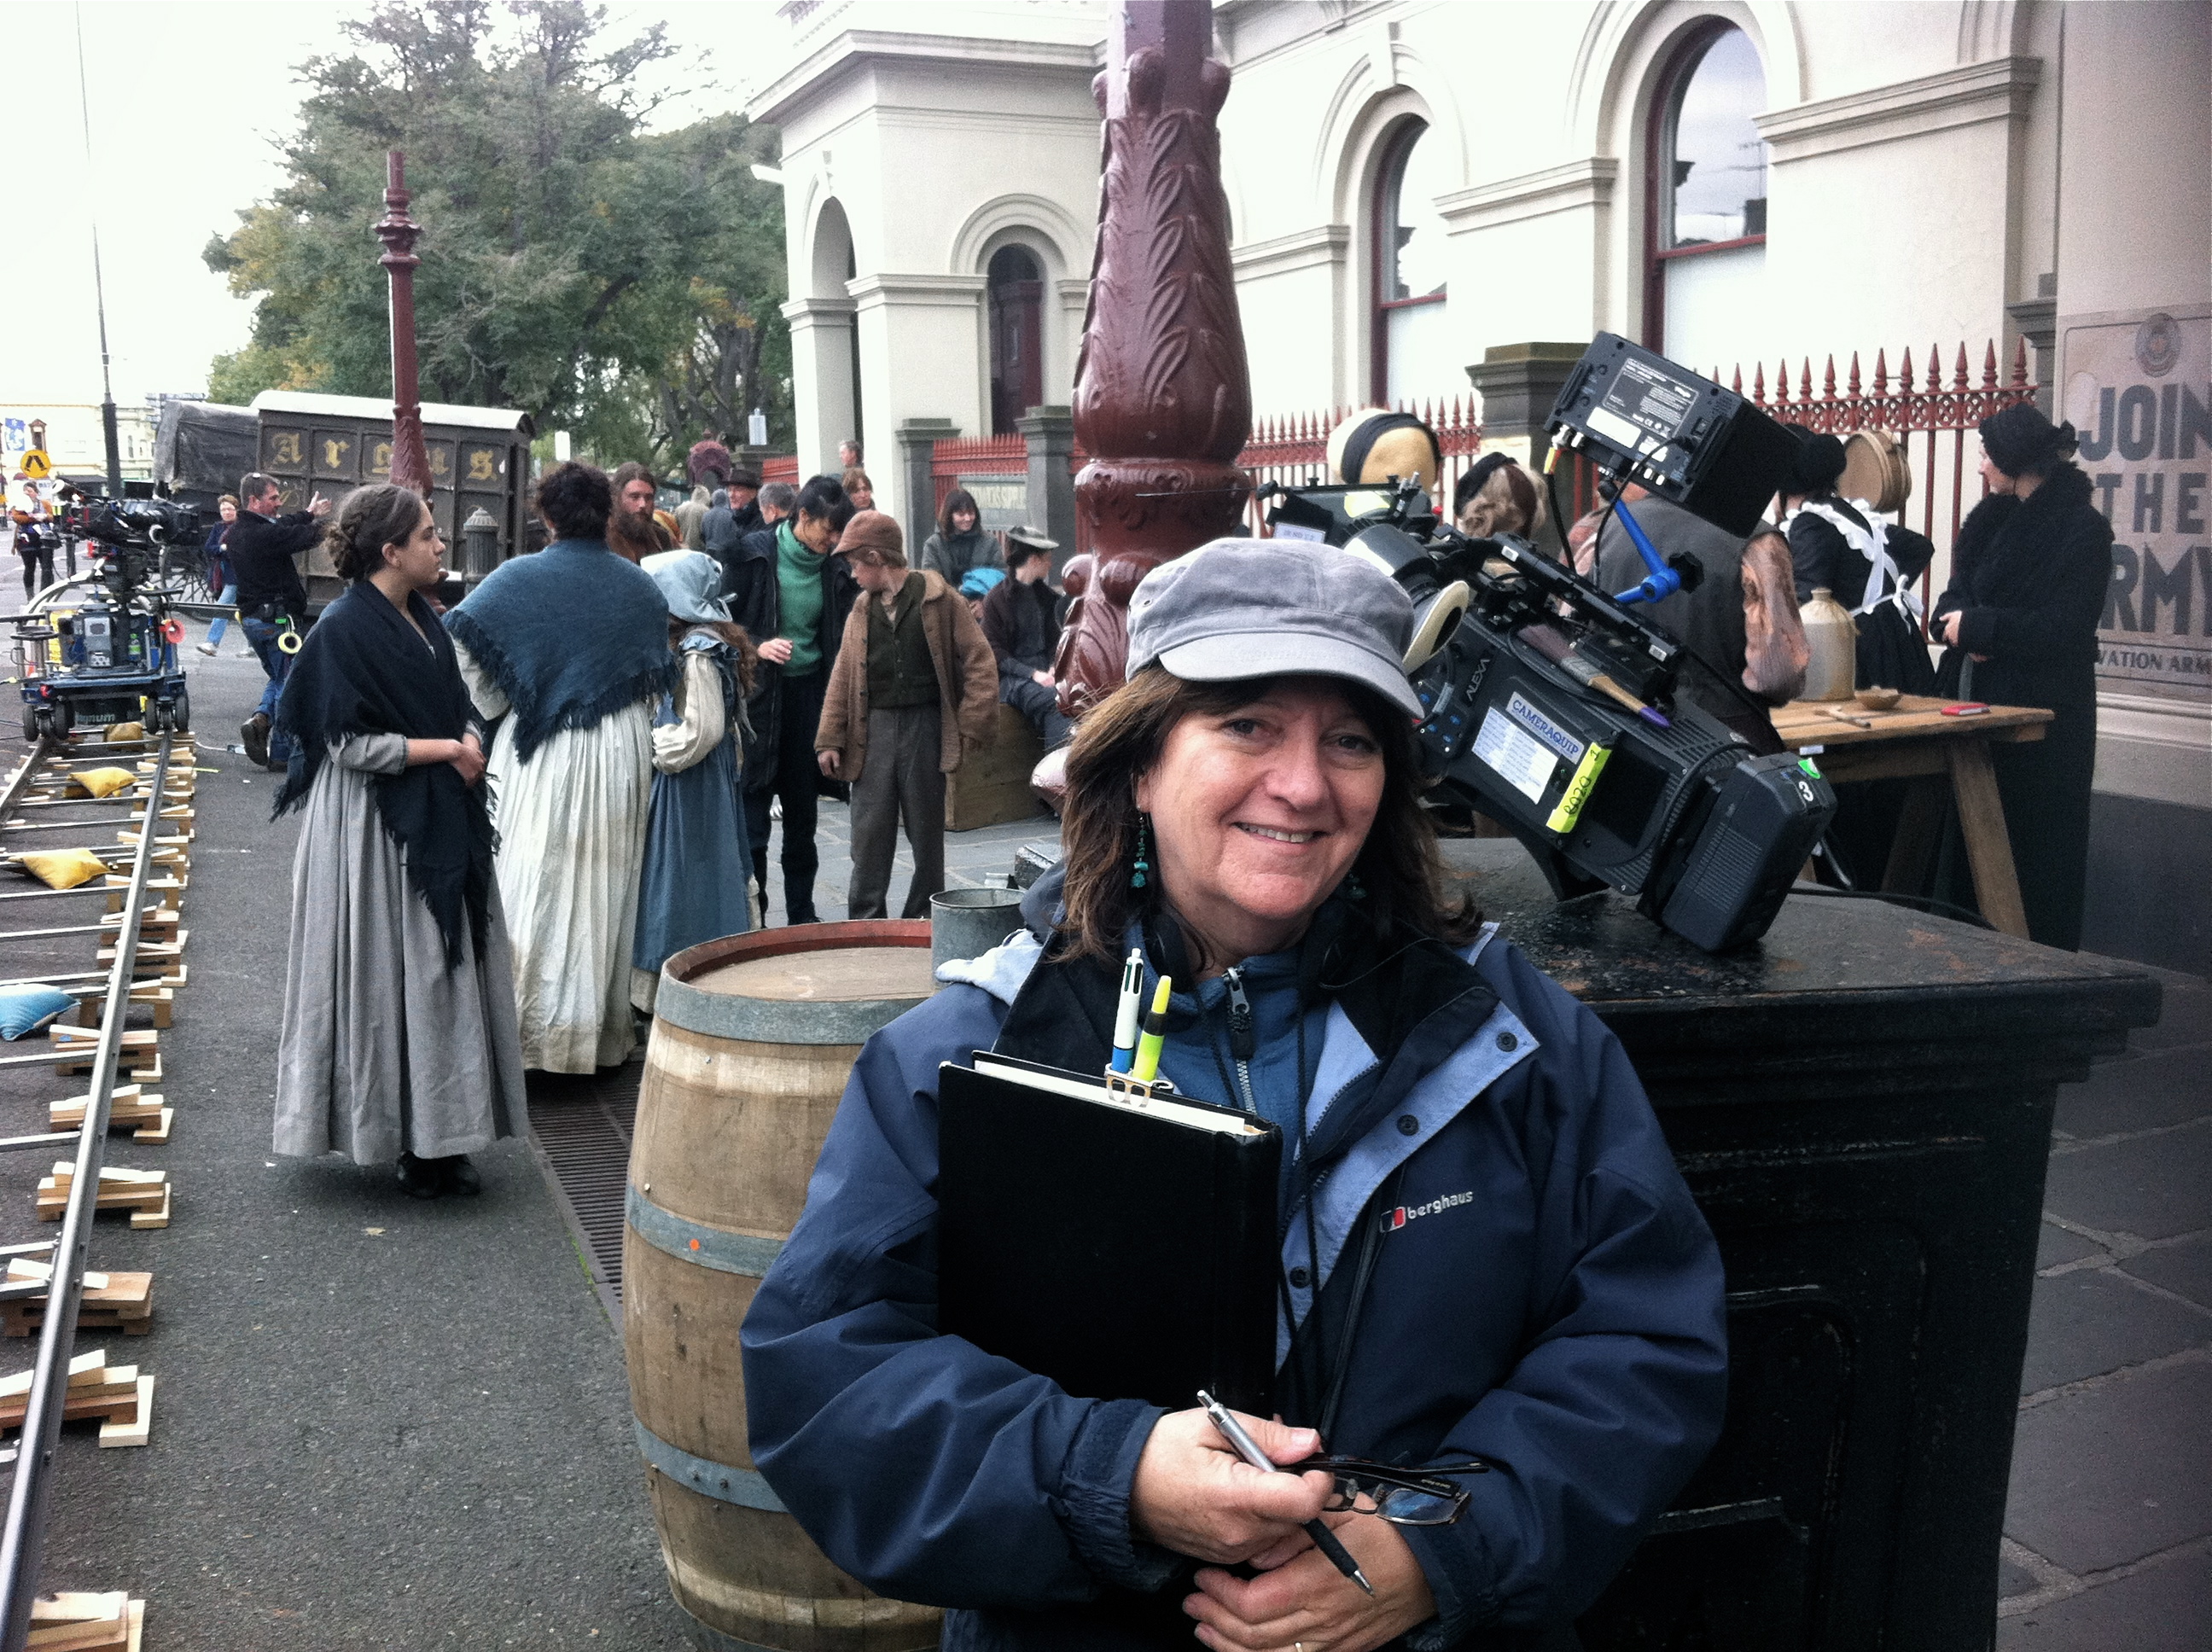 filming 'The Mystery of a Hansom Cab' in Williamstown, Melbourne, Vic, Australia